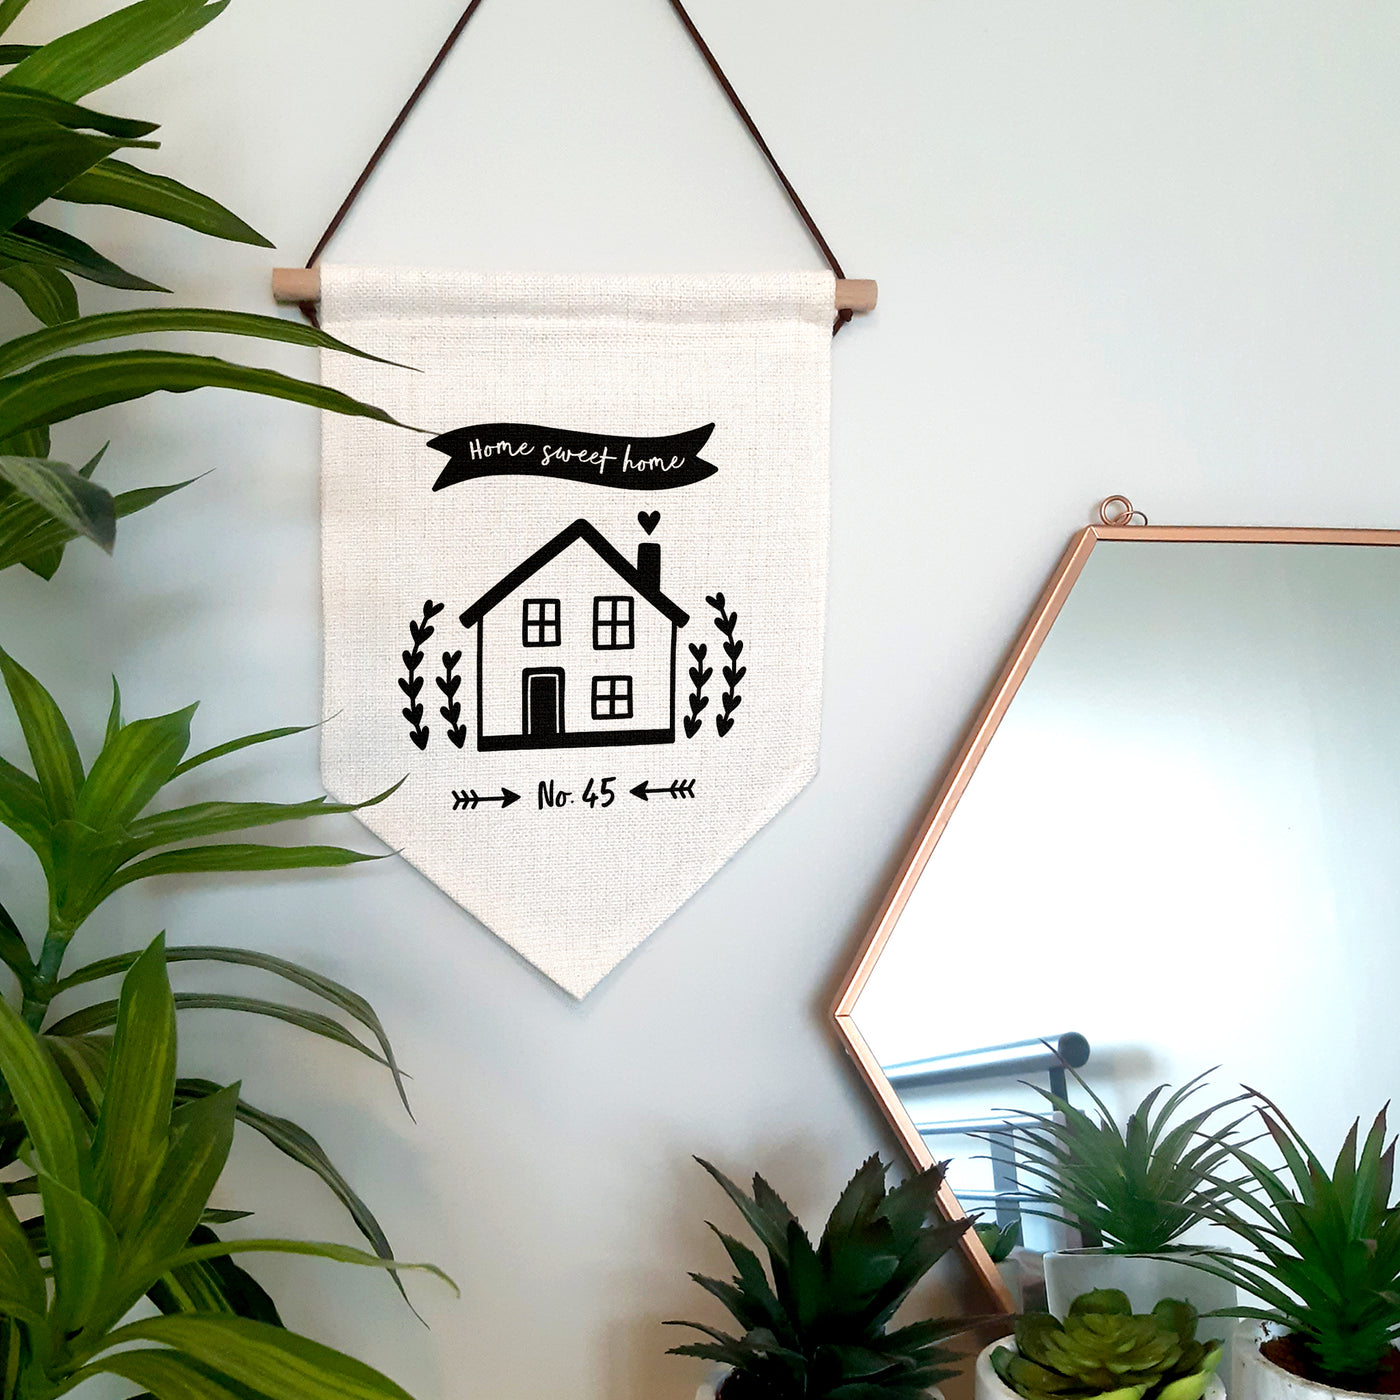 Illustrated Home Wall Hanging